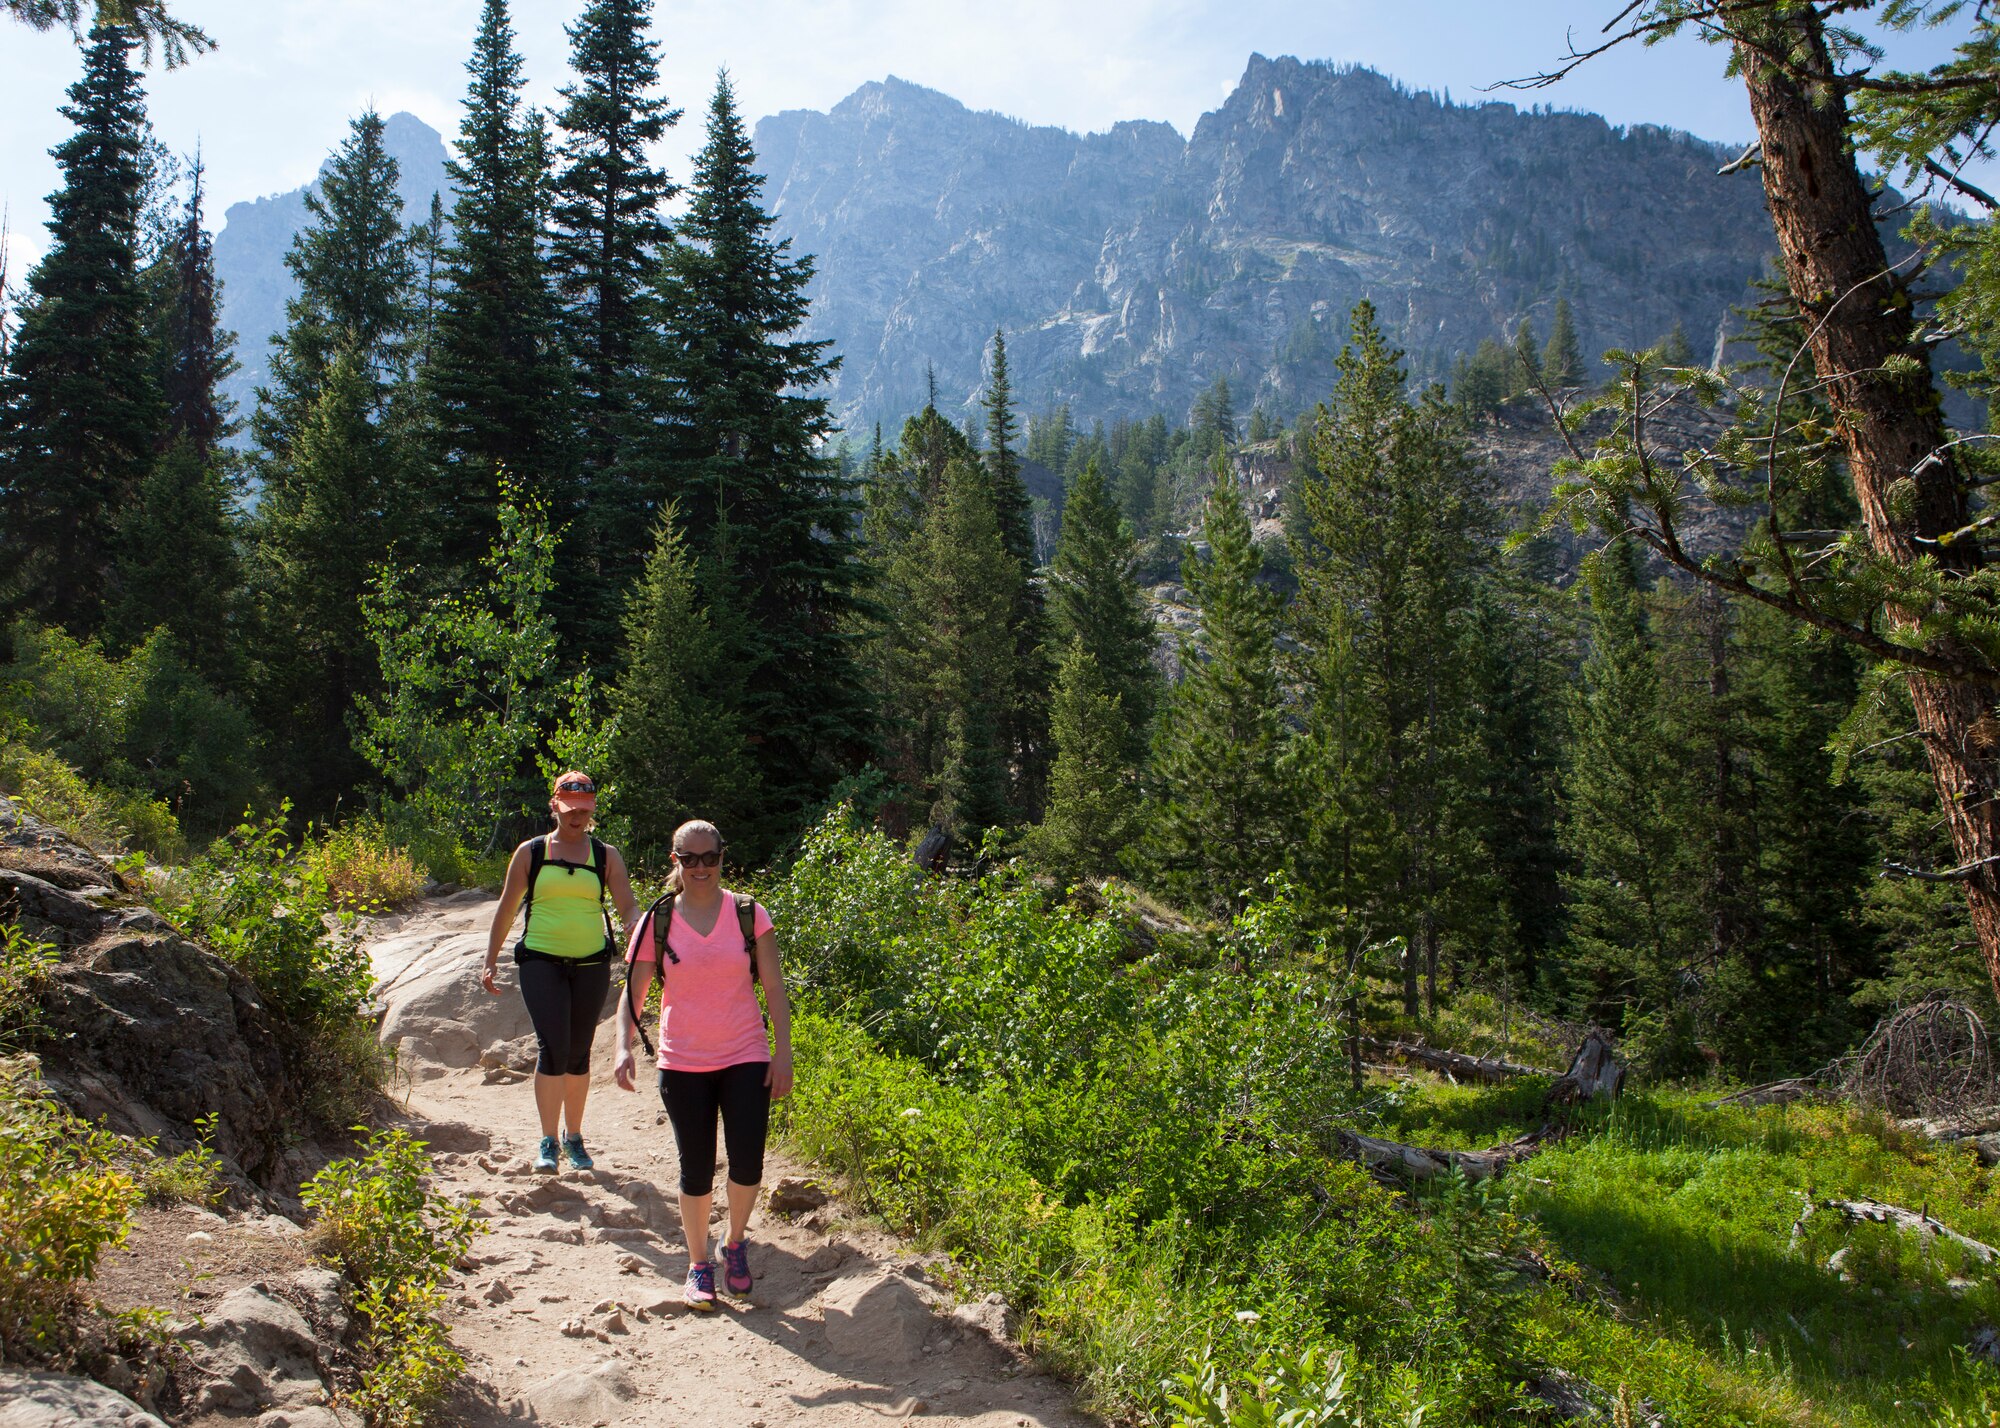 Airman 1st Class Alexis Visser, 90th Munitions Squadron, and Senior Airman Rachel Silverberg, 90th Force Support Squadron, hike the Hidden Falls trail in Grand Teton National Park, Wyo., July 3, 2015. Visser and Silverberg were participants of an F.E. Warren Air Force Base Outdoor Recreation trip that explored the natural attractions of Grand Teton and Yellowstone National Park during the July 4th weekend. (U.S. Air Force photo by Lan Kim)